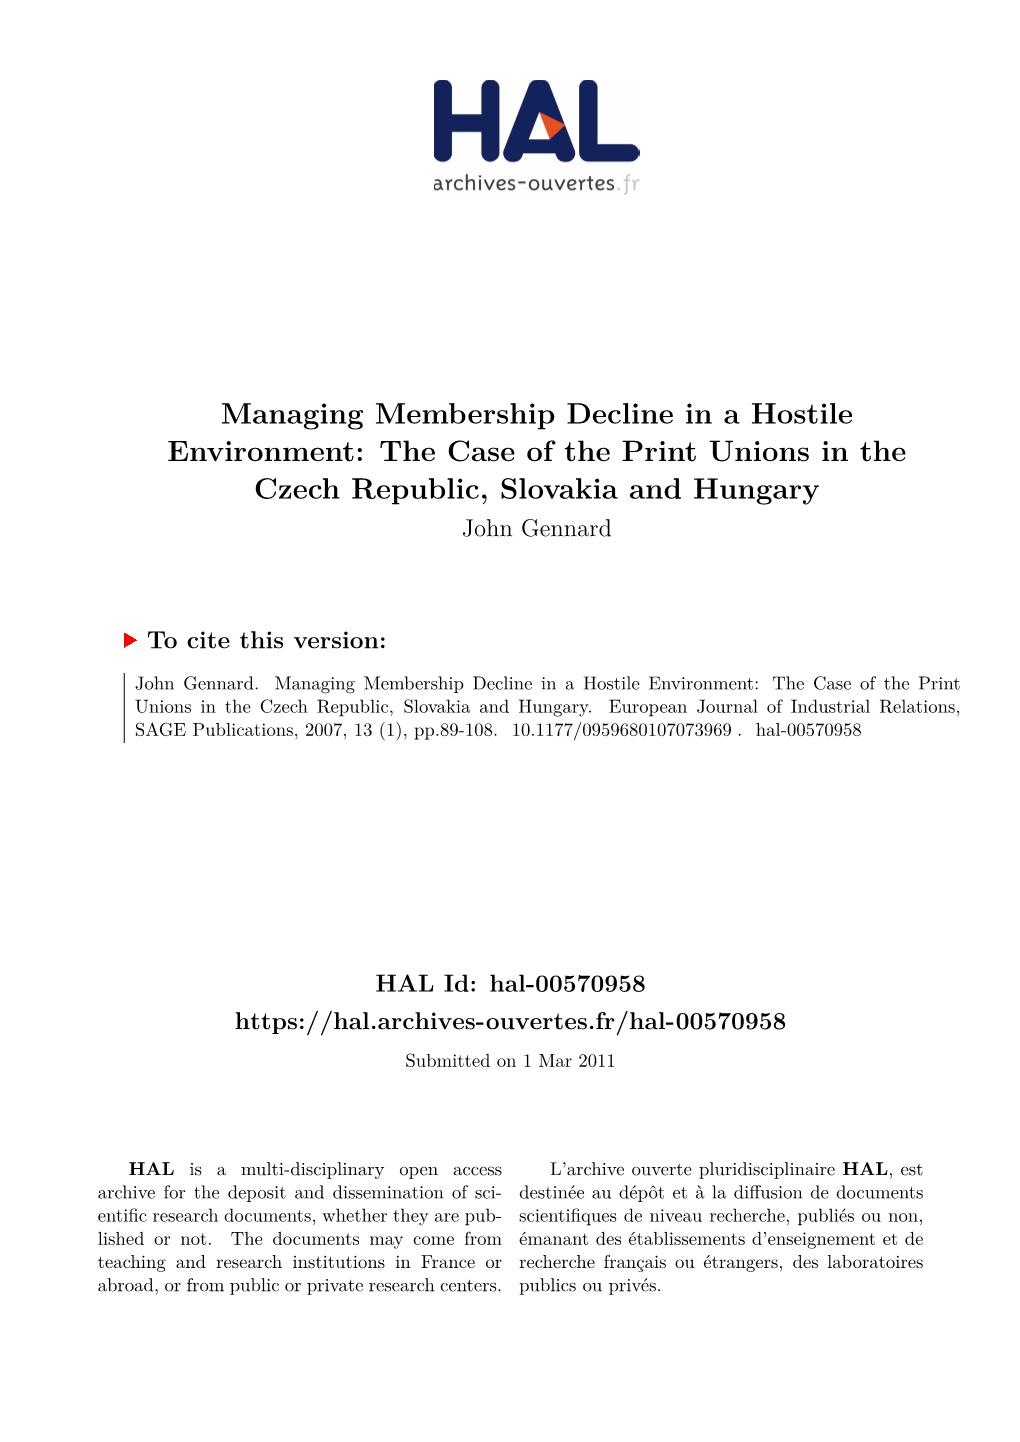 Managing Membership Decline in a Hostile Environment: the Case of the Print Unions in the Czech Republic, Slovakia and Hungary John Gennard